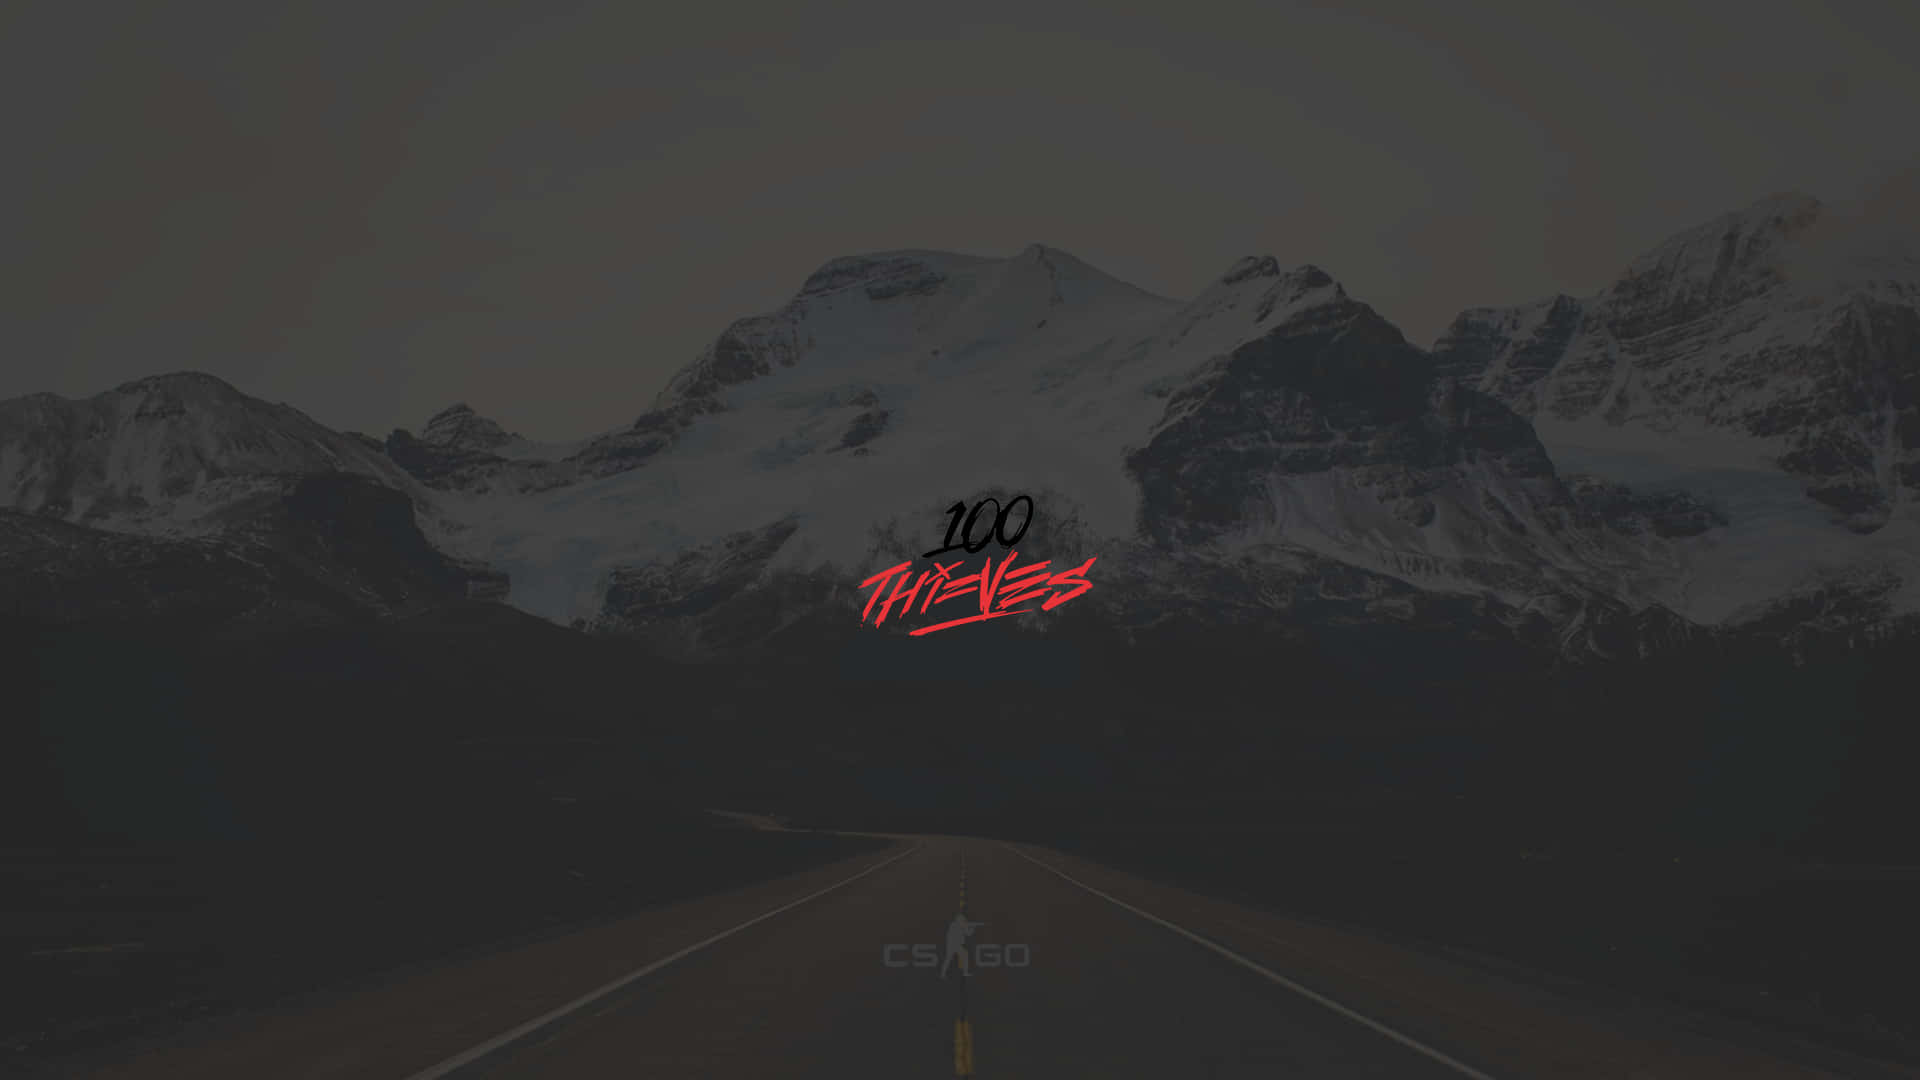 100 Thieves In The Mountains Wallpaper